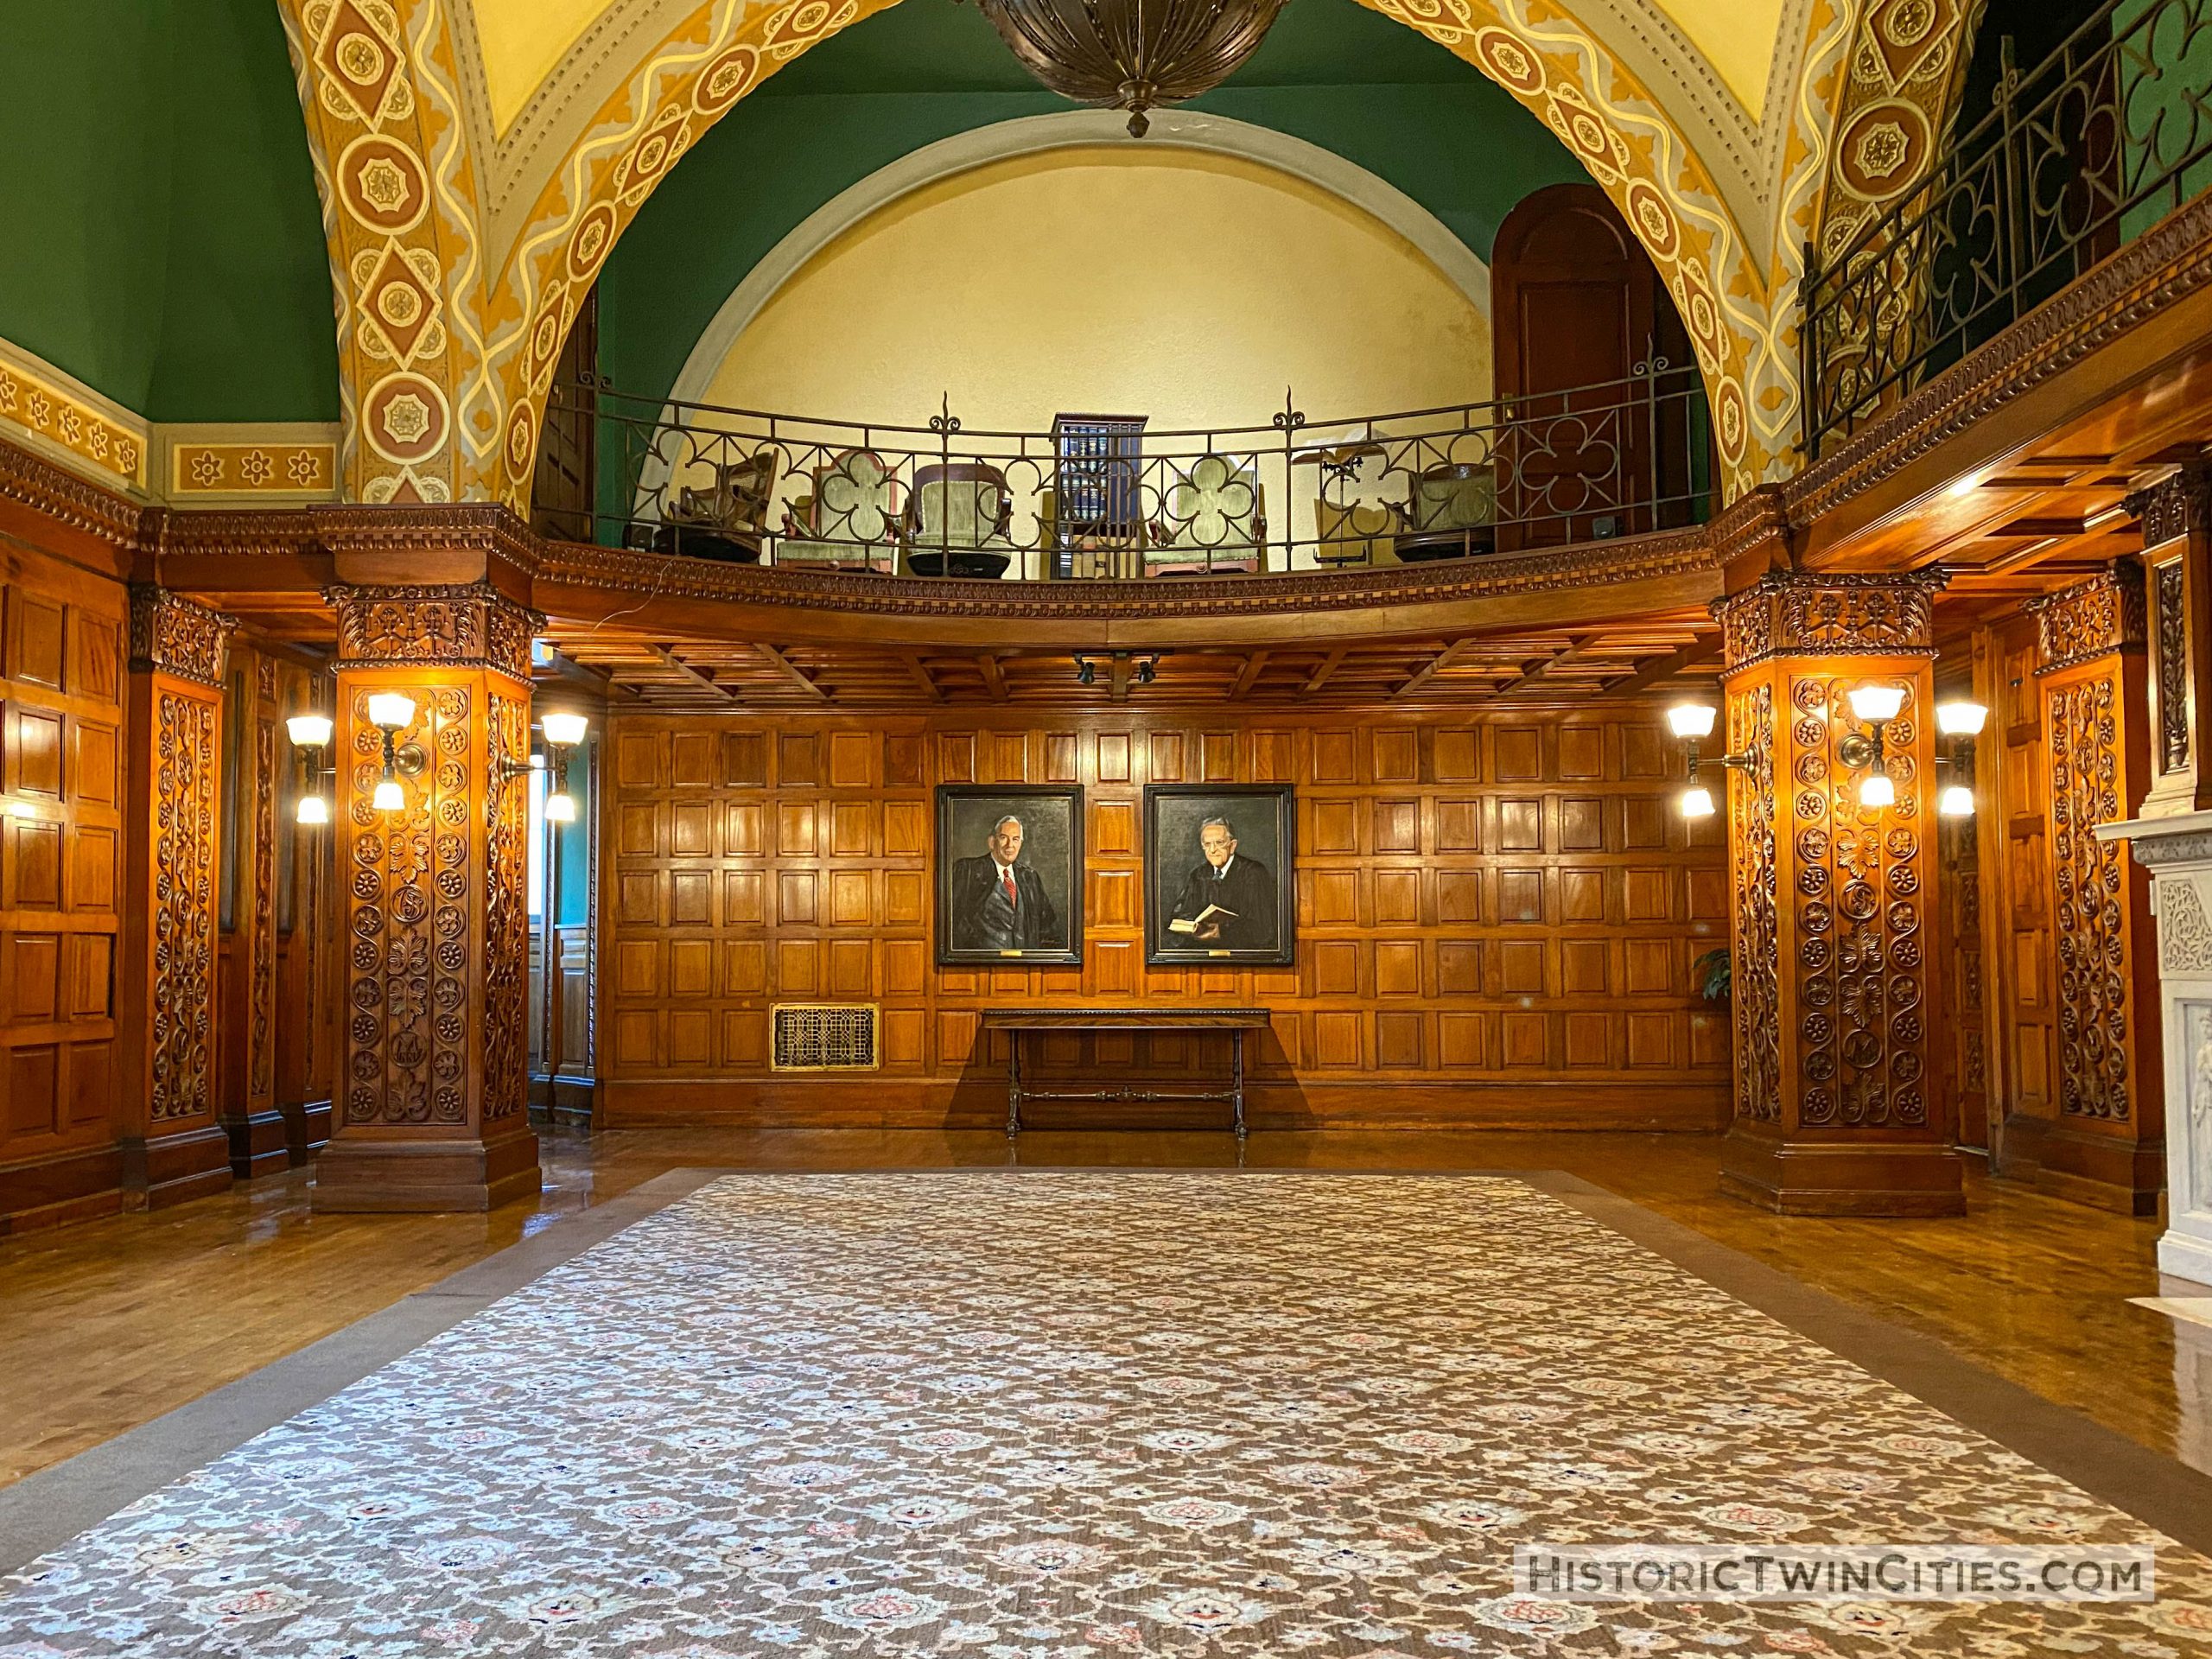 The Chief Justice Room (Room 430), originally the Law Library, of the Landmark Center in St. Paul, MN